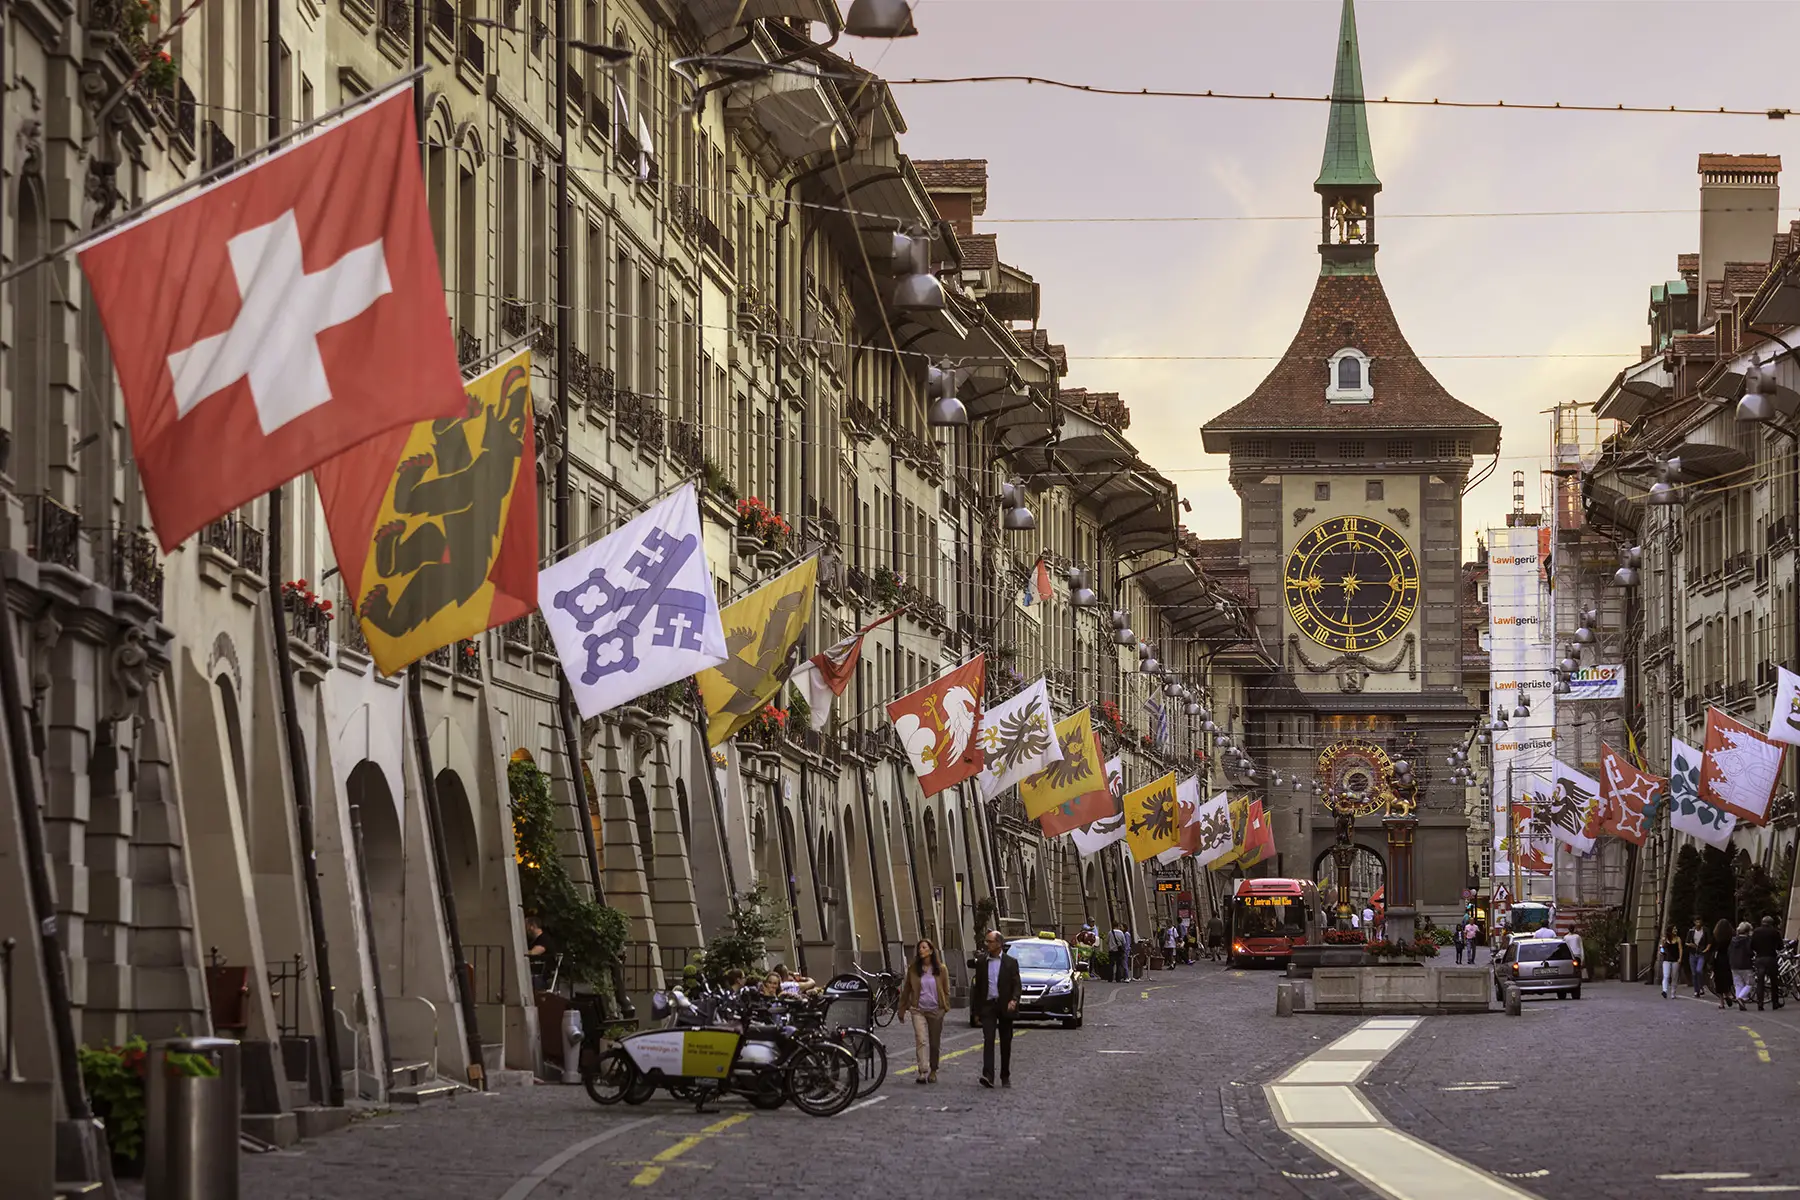 The busy Kramgasse in Bern at sunset